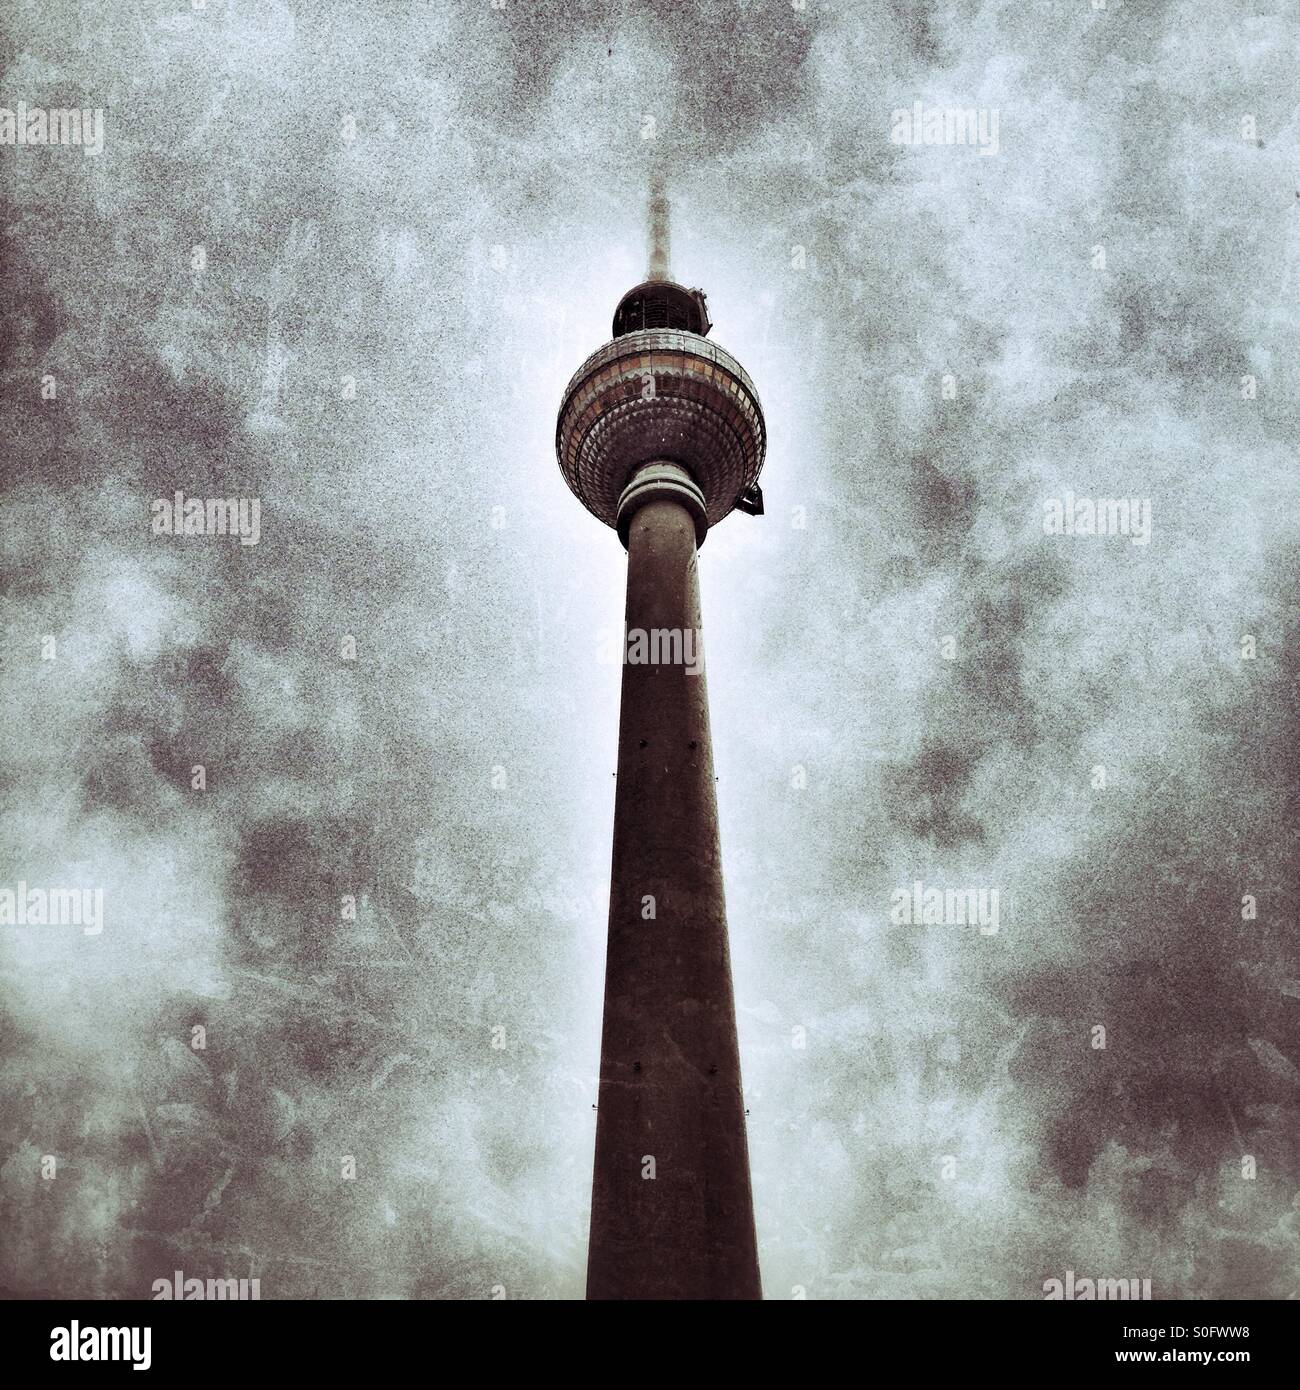 Berlin tv Tower in the Clouds Stock Photo